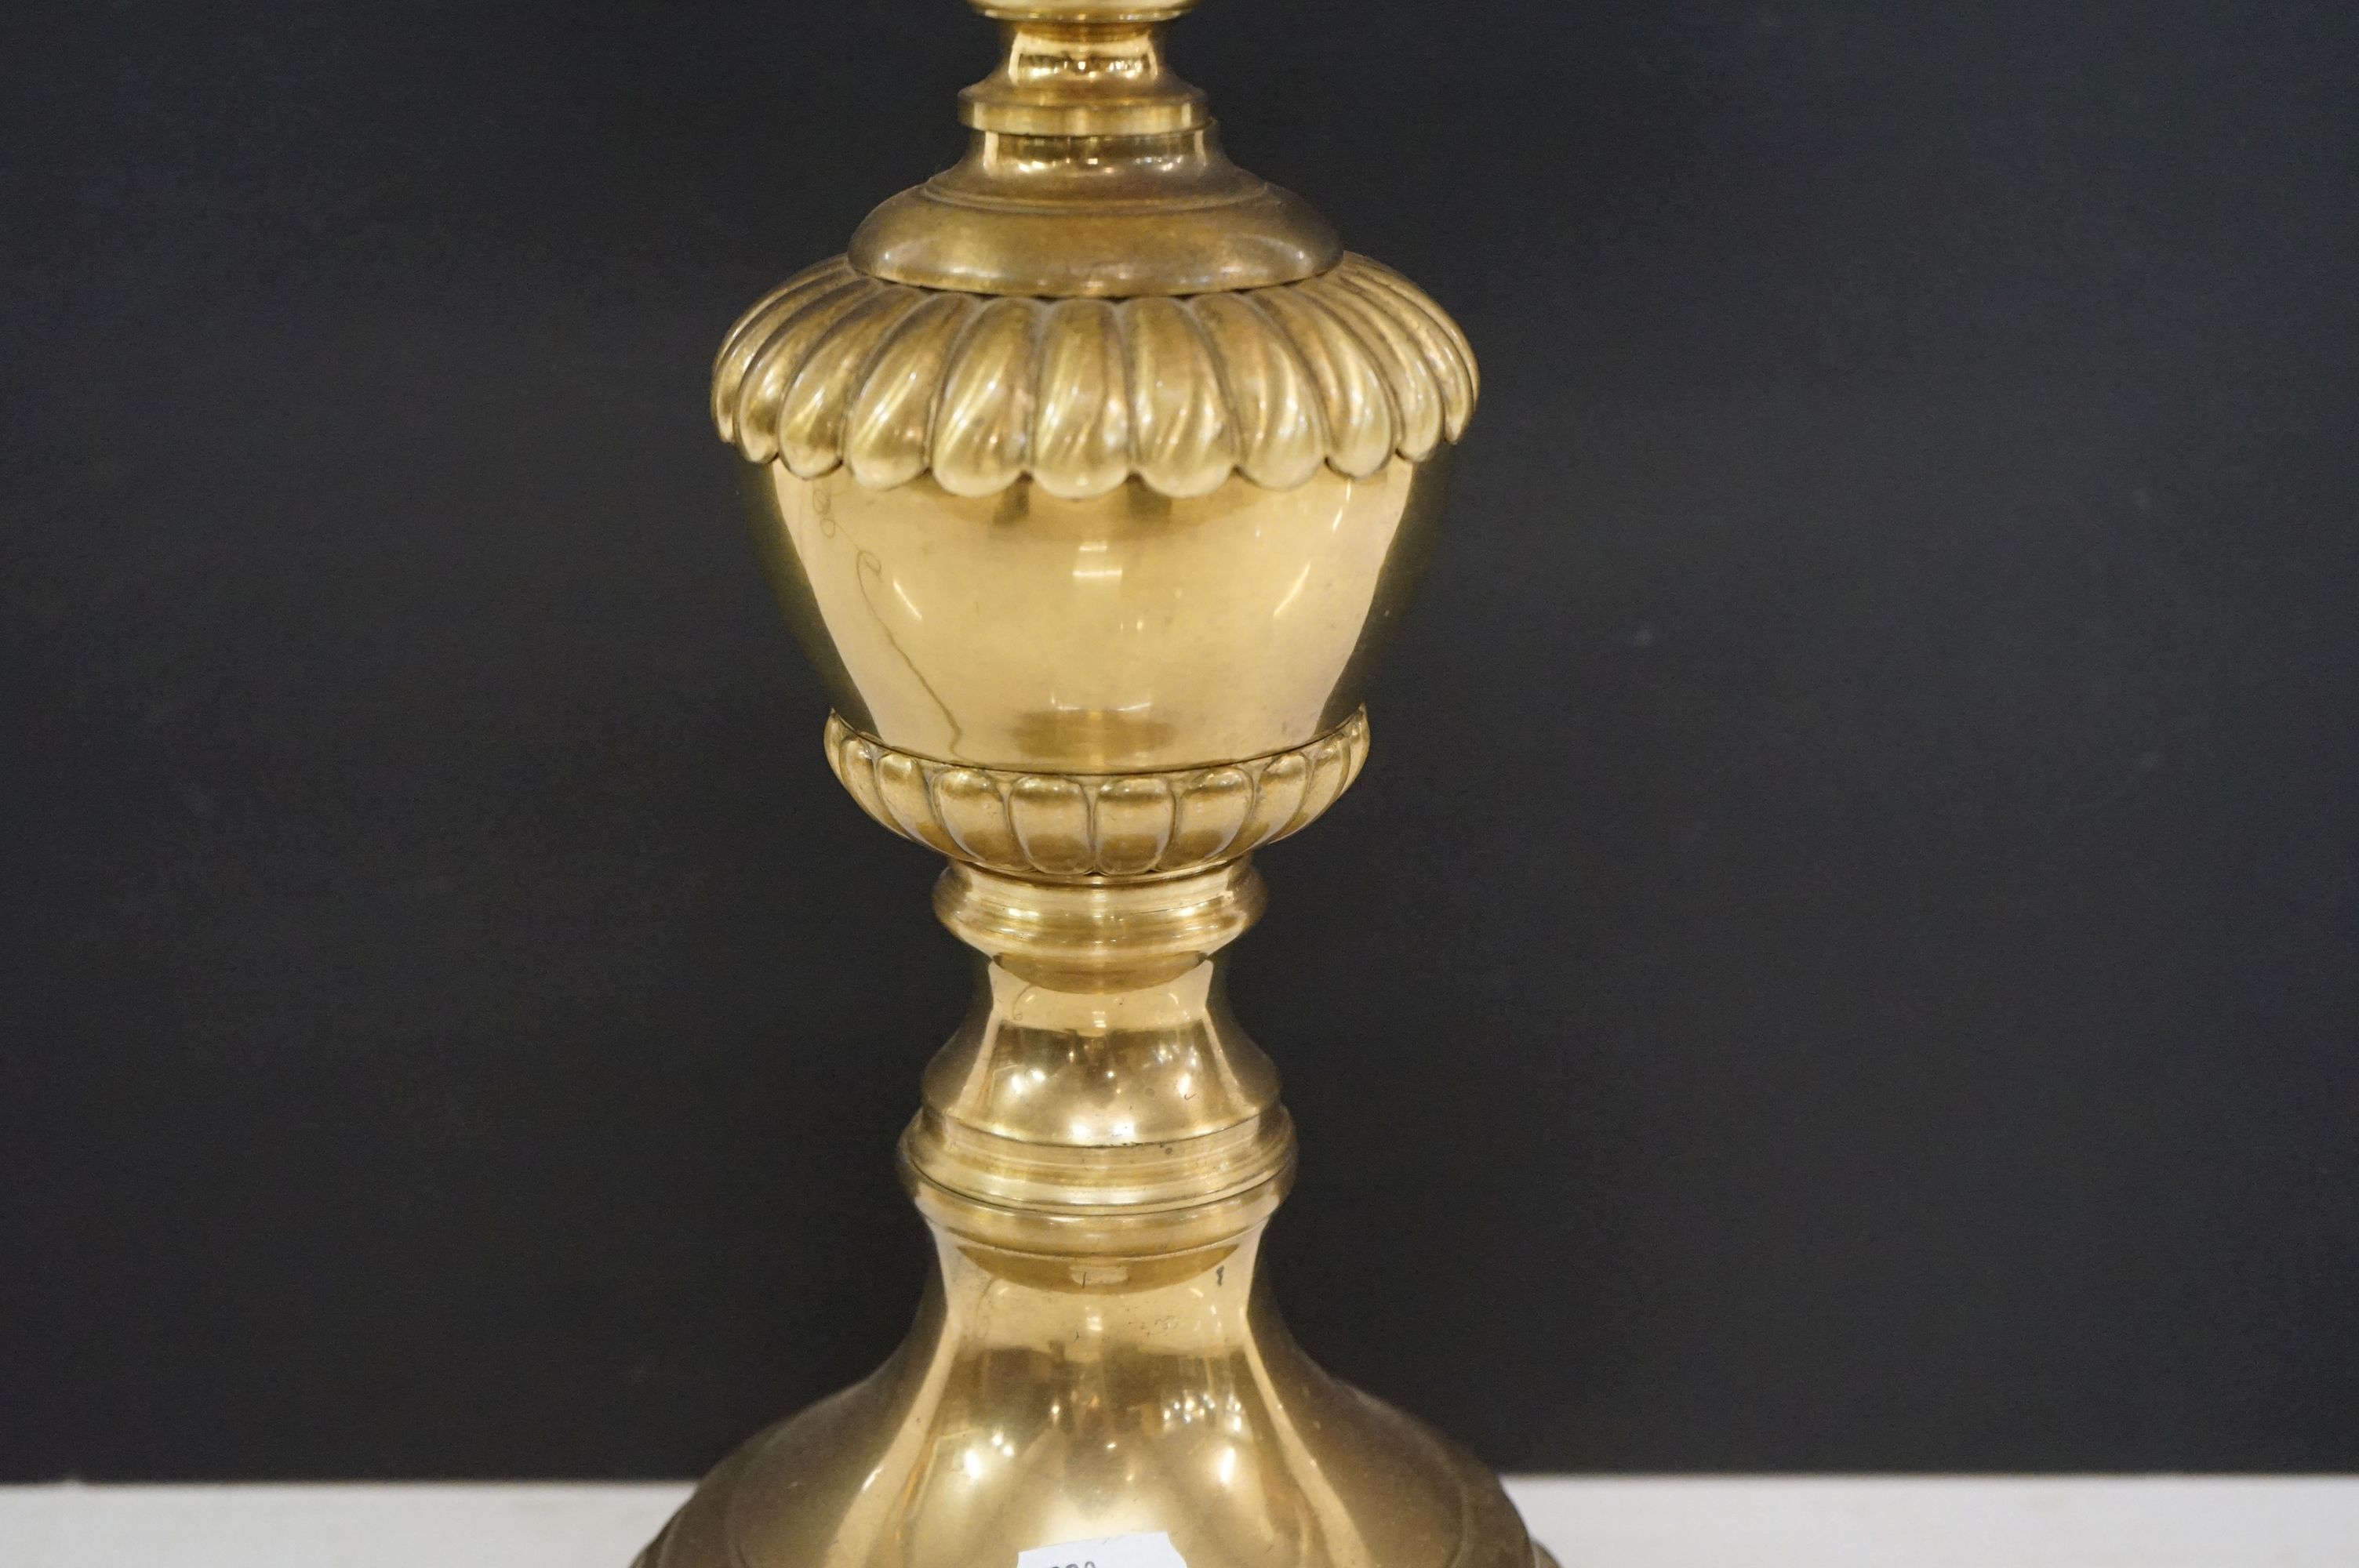 Lampart brass table lamp, with shade, height to light fitting 63cm - Image 3 of 6